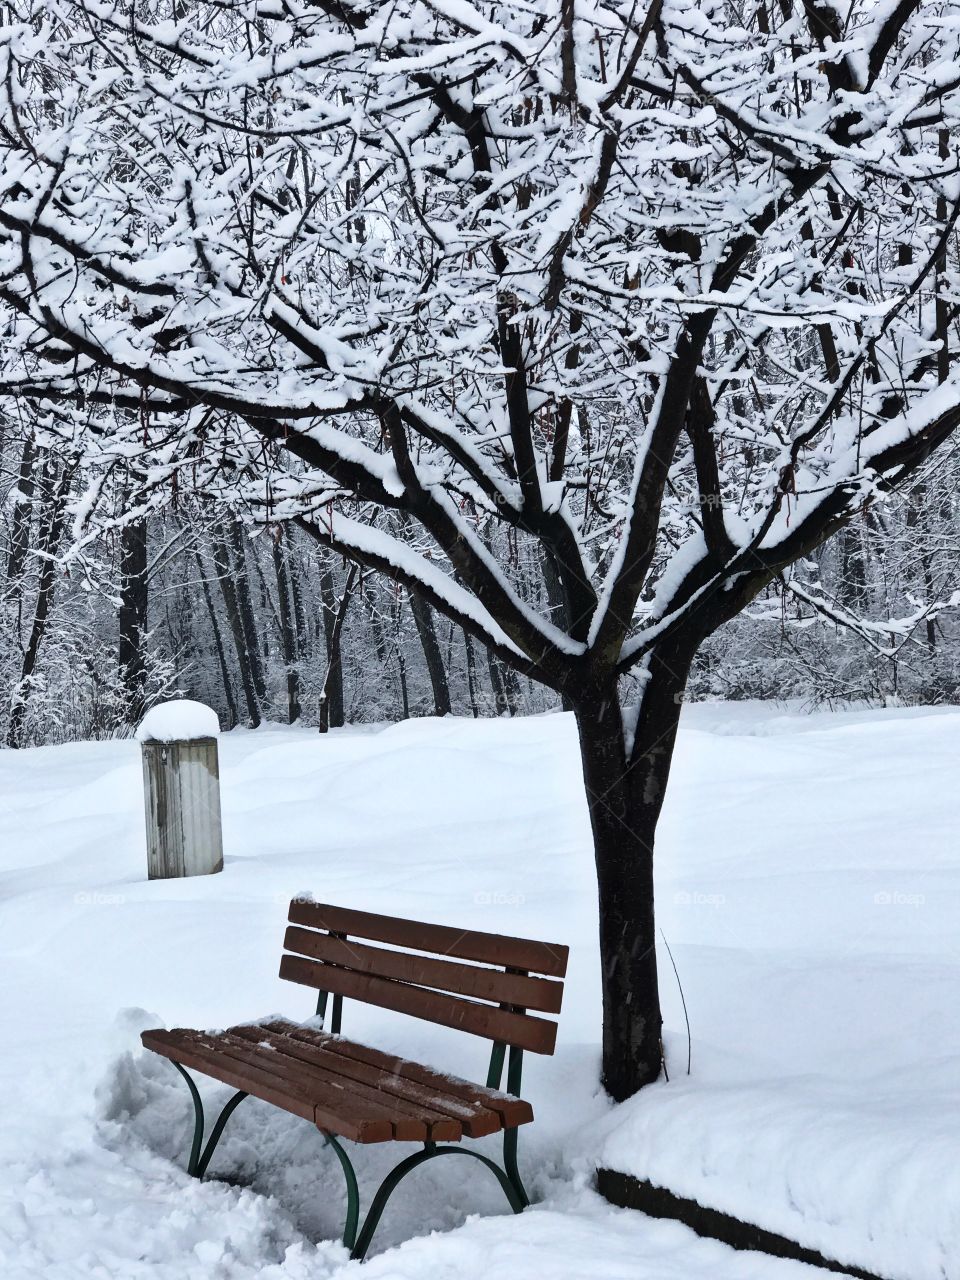 Bench under bare tree in winter